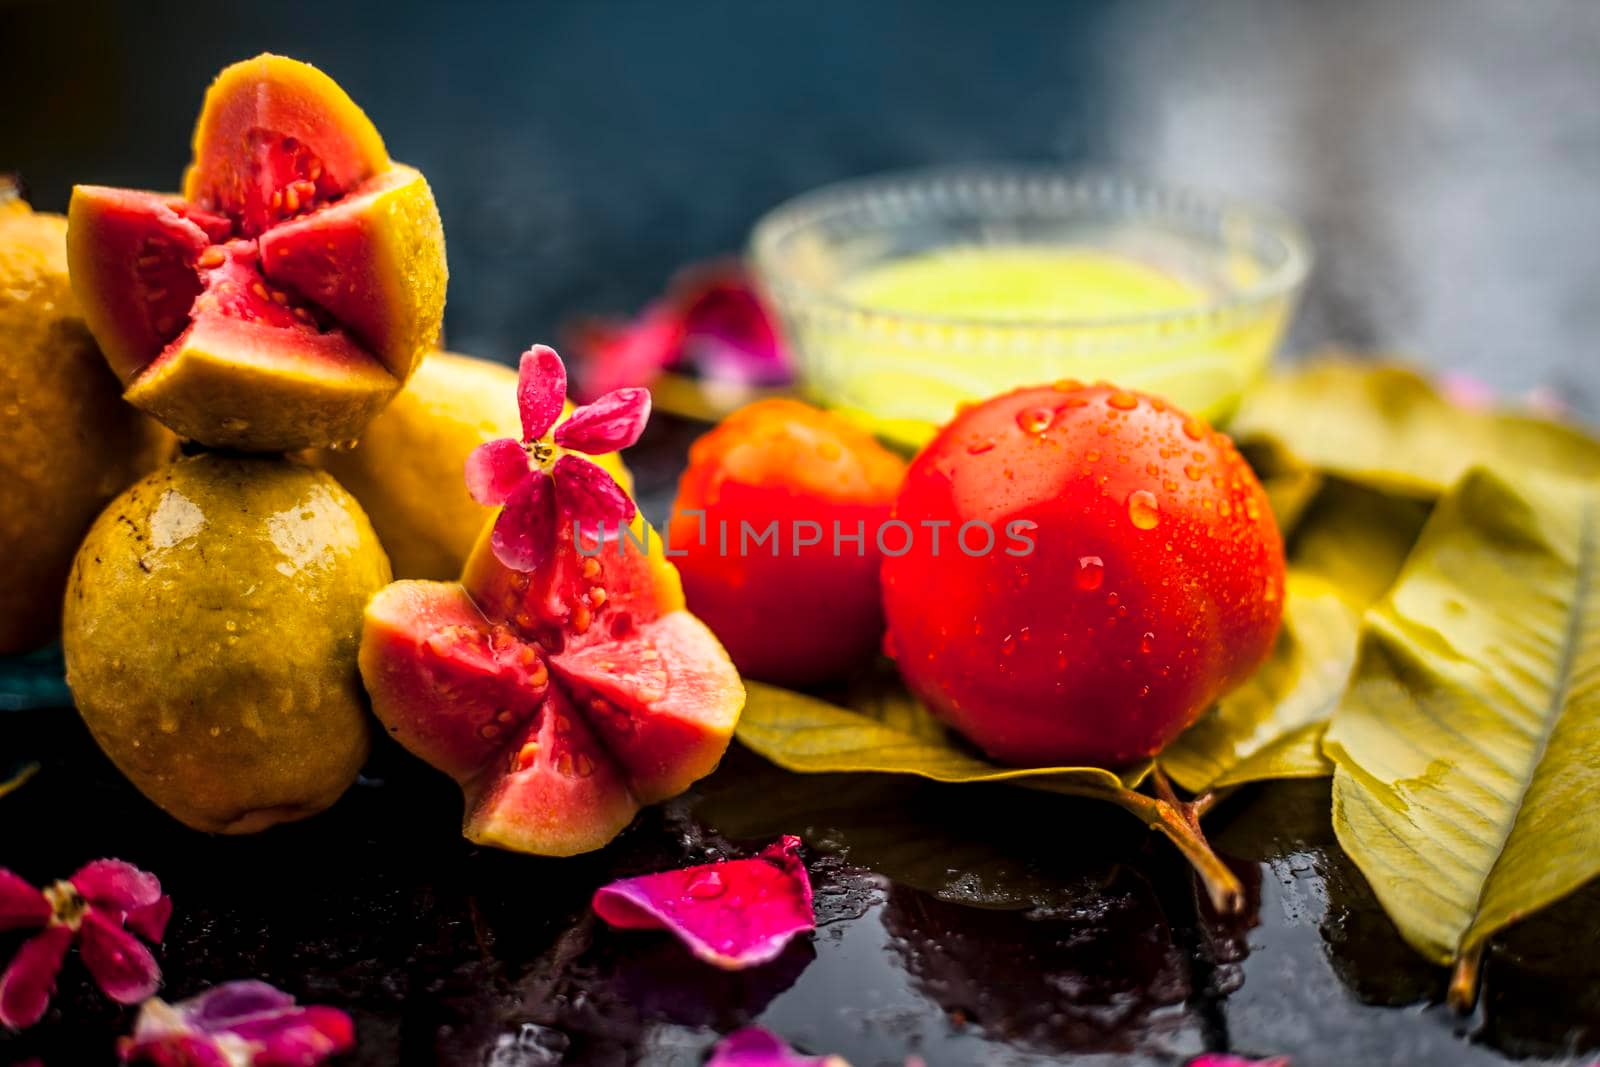 Best cheap face mask for tanned skin on wooden surface un a glass bowl consisting of guava leaves paste well mixed with some tomato pulp. Shot with entire ingredients with fantastic colors. by mirzamlk